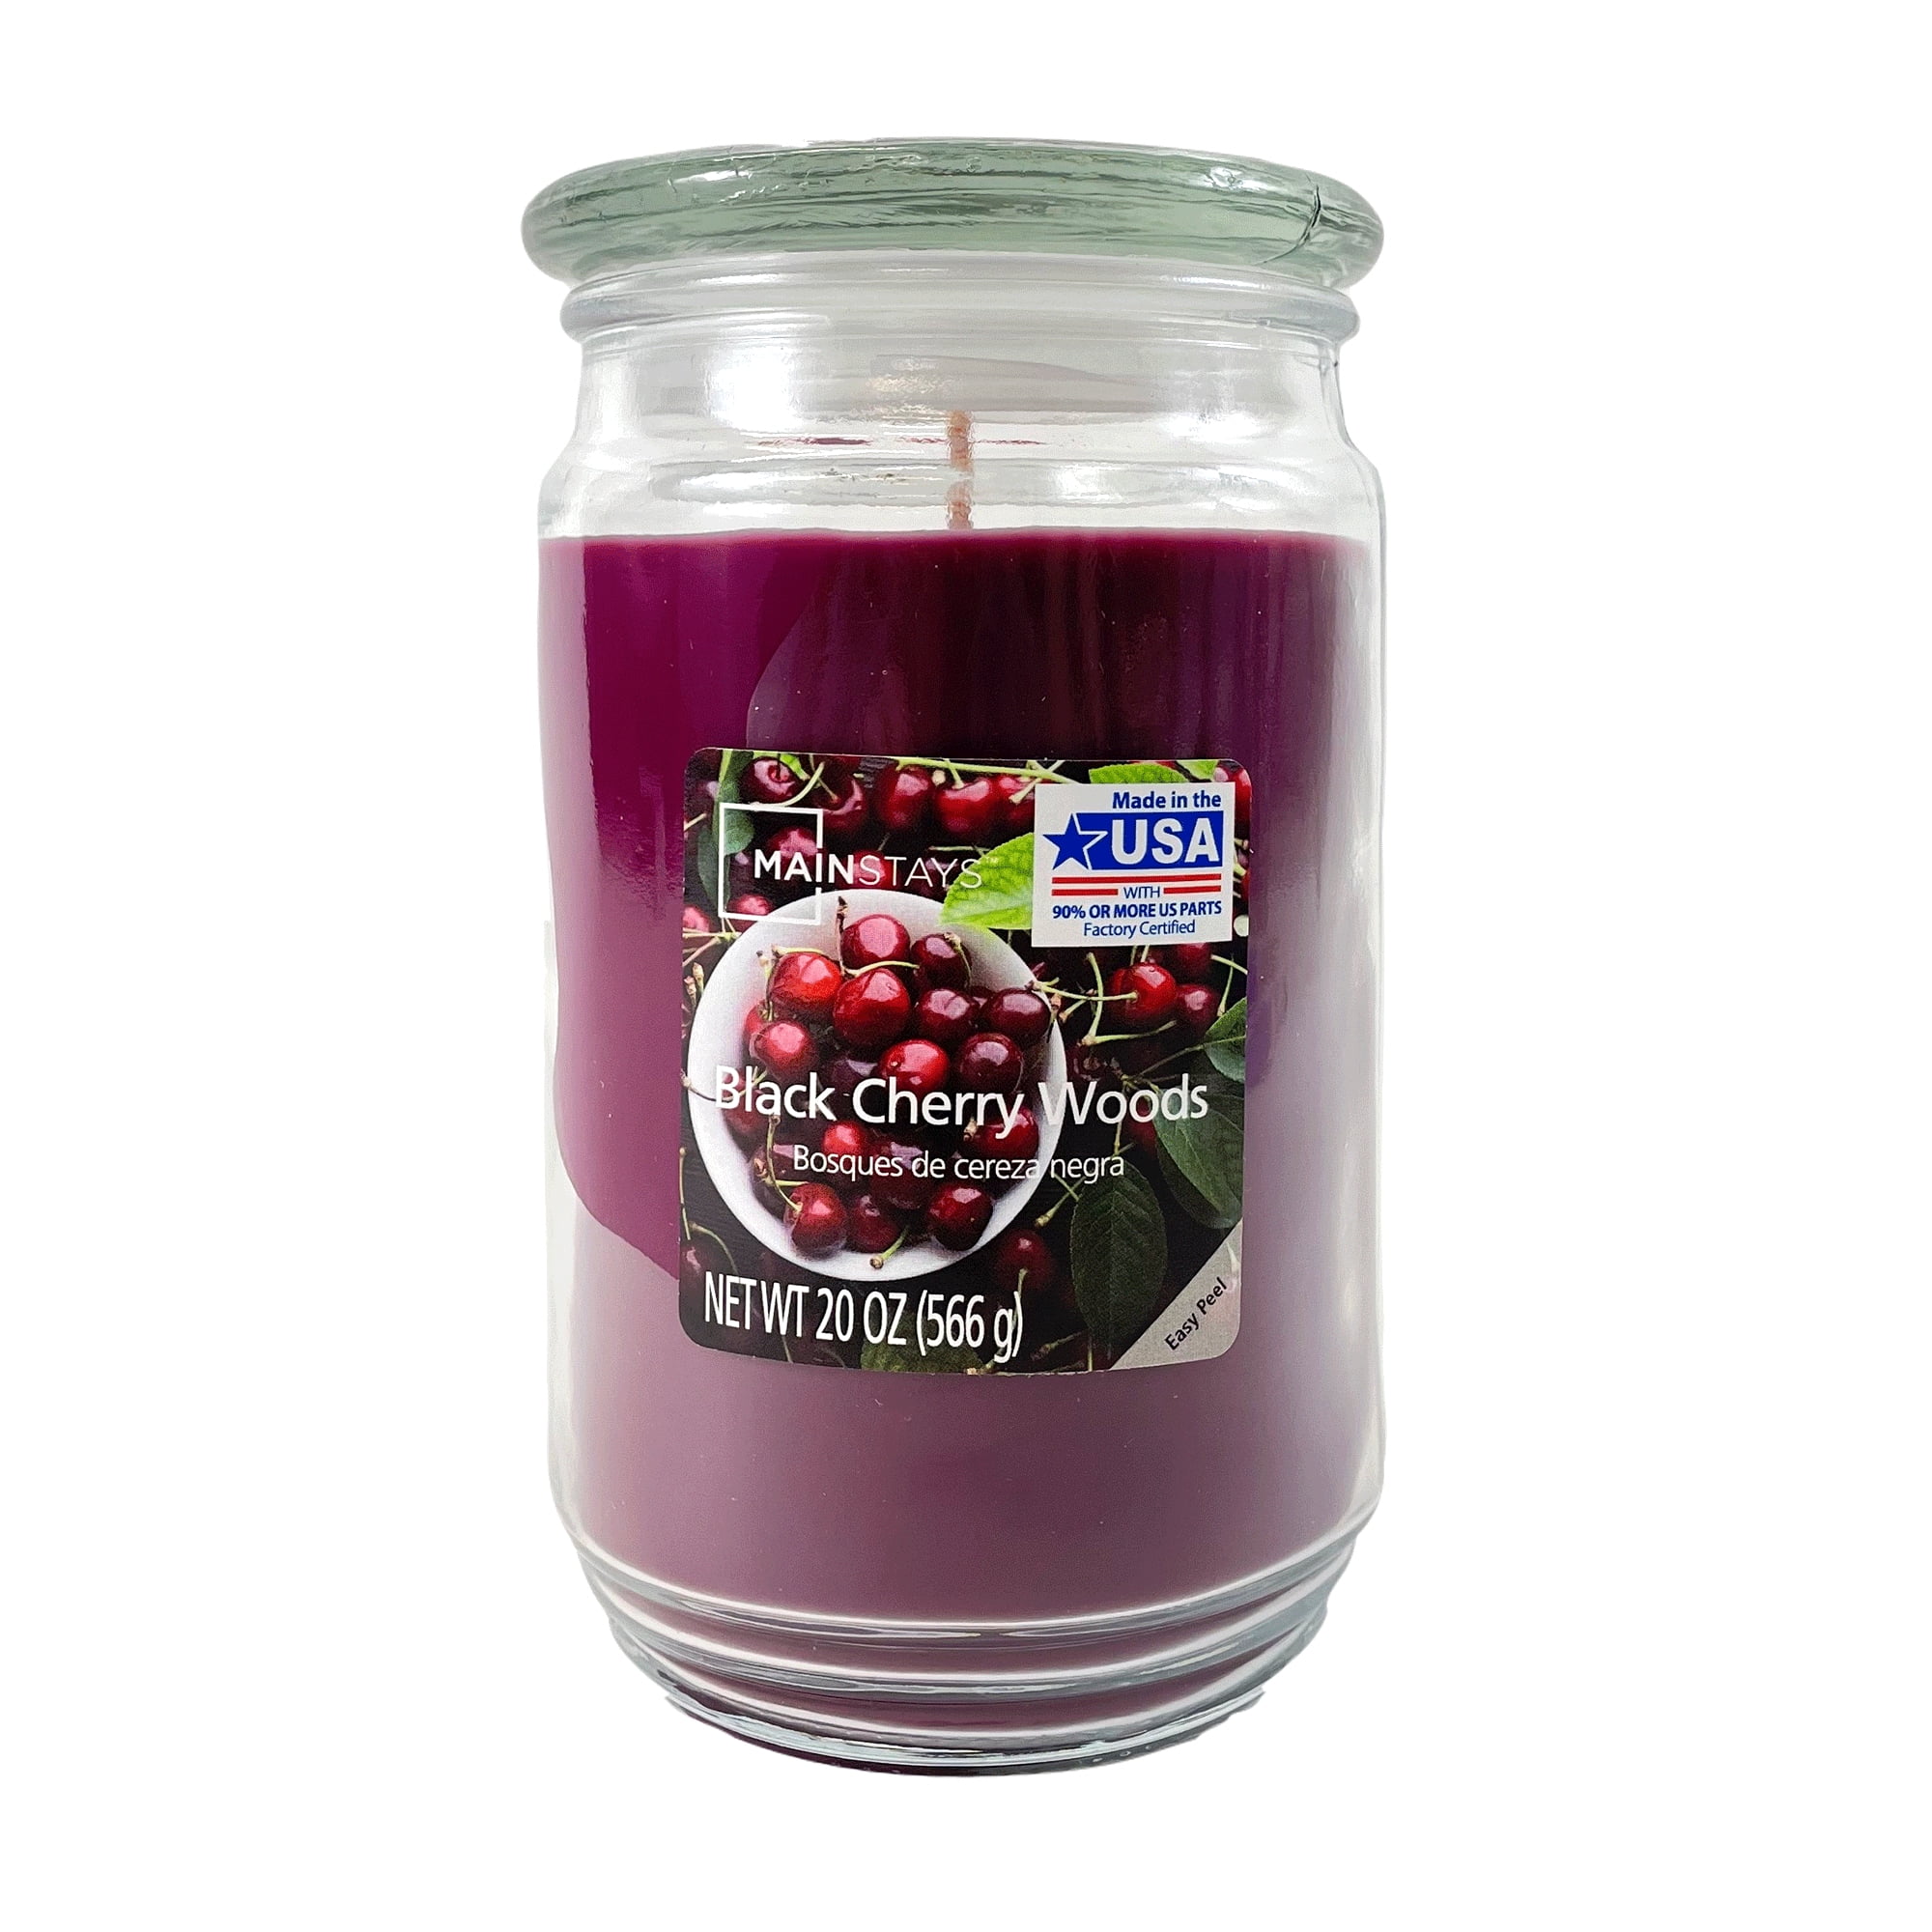 Mainstays Black Cherry Woods Scented Single-Wick Large Glass Jar Candle, 20 oz.